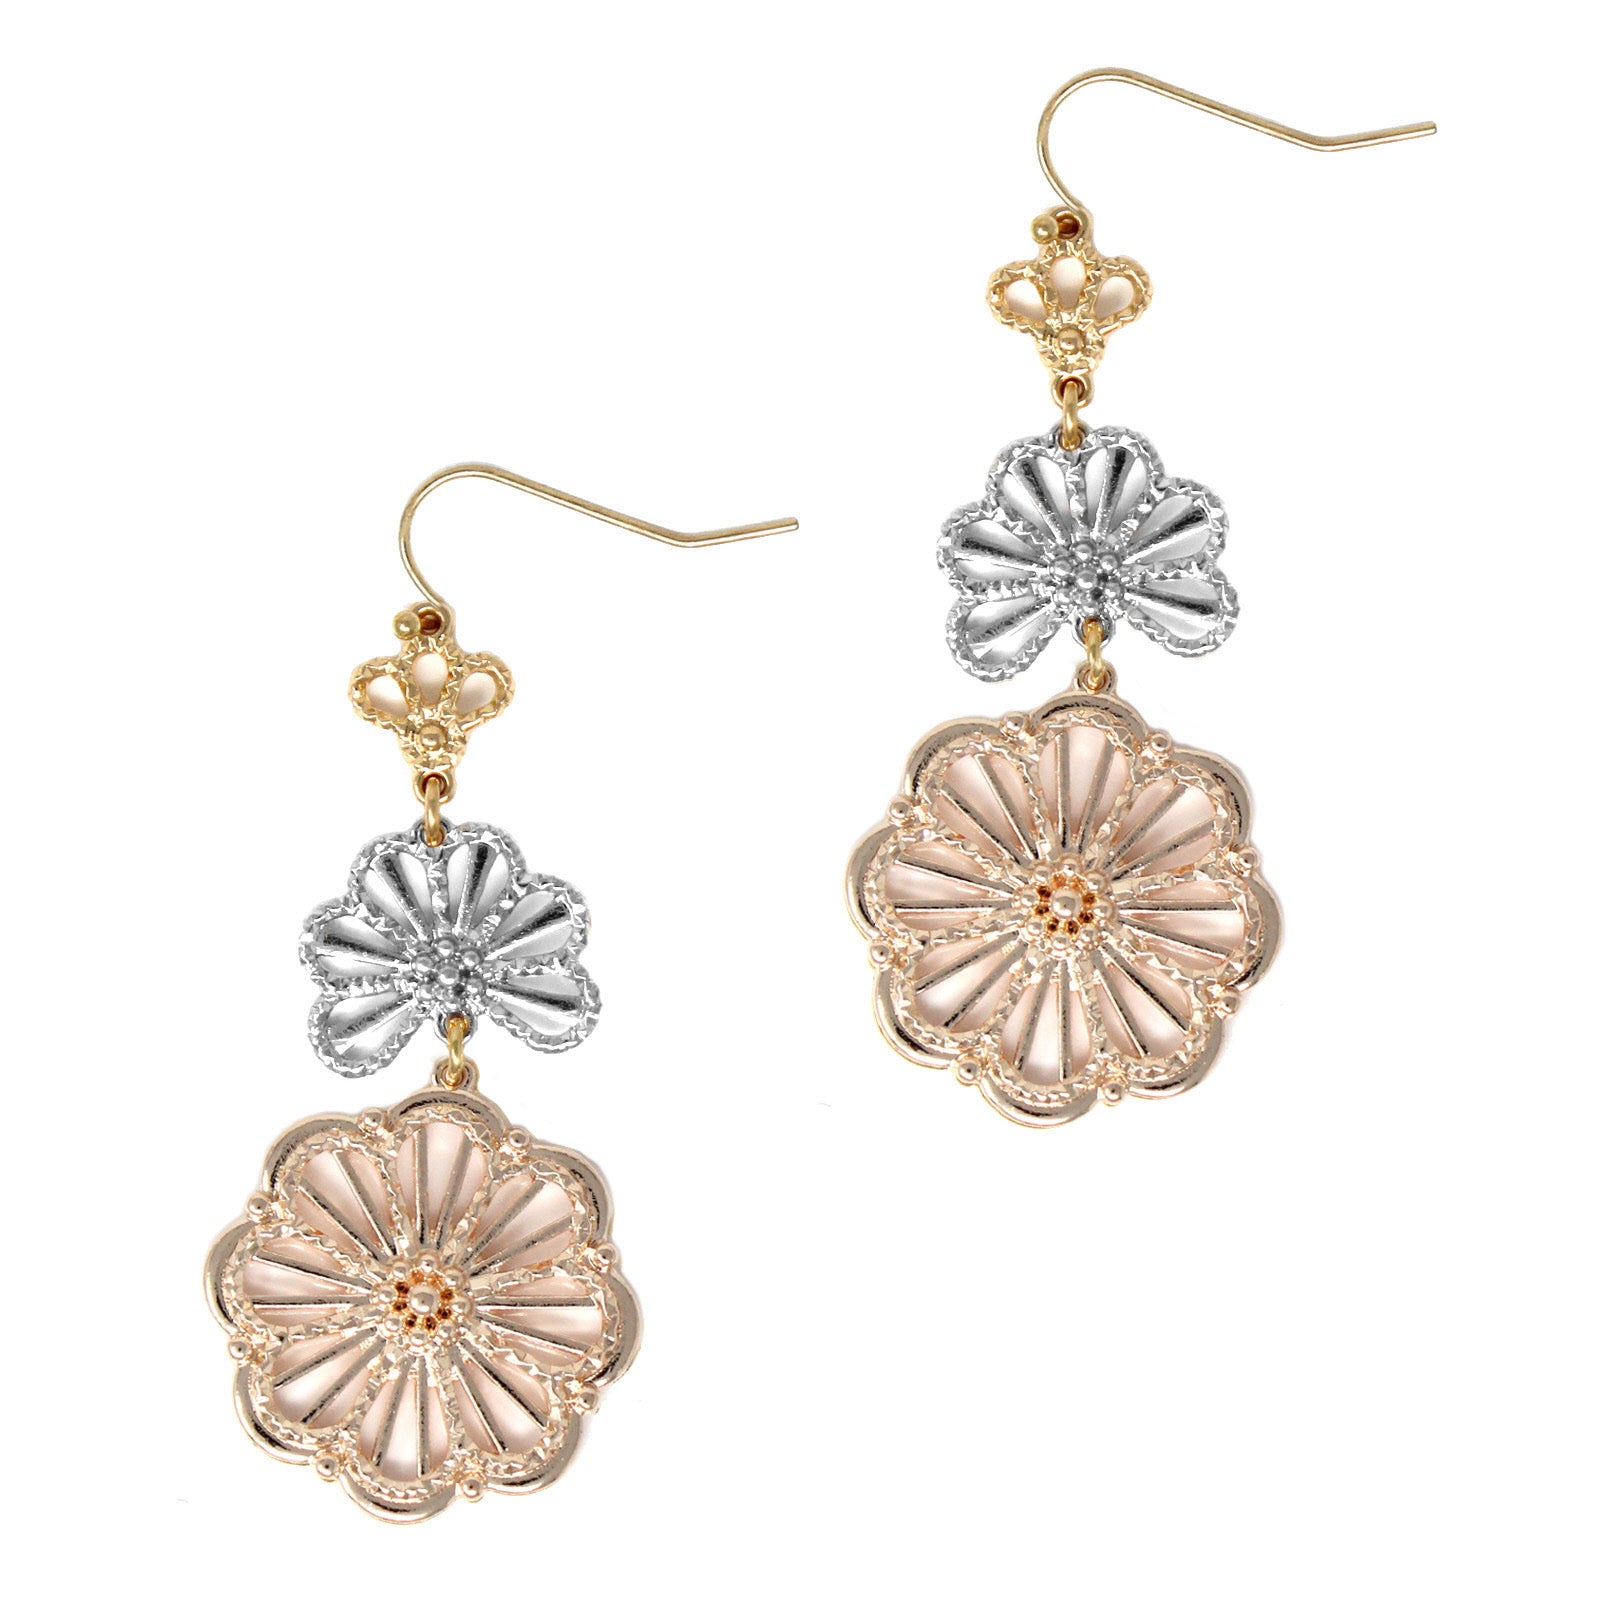 Blooming Through Spring Gold & Silver Dangle Earrings